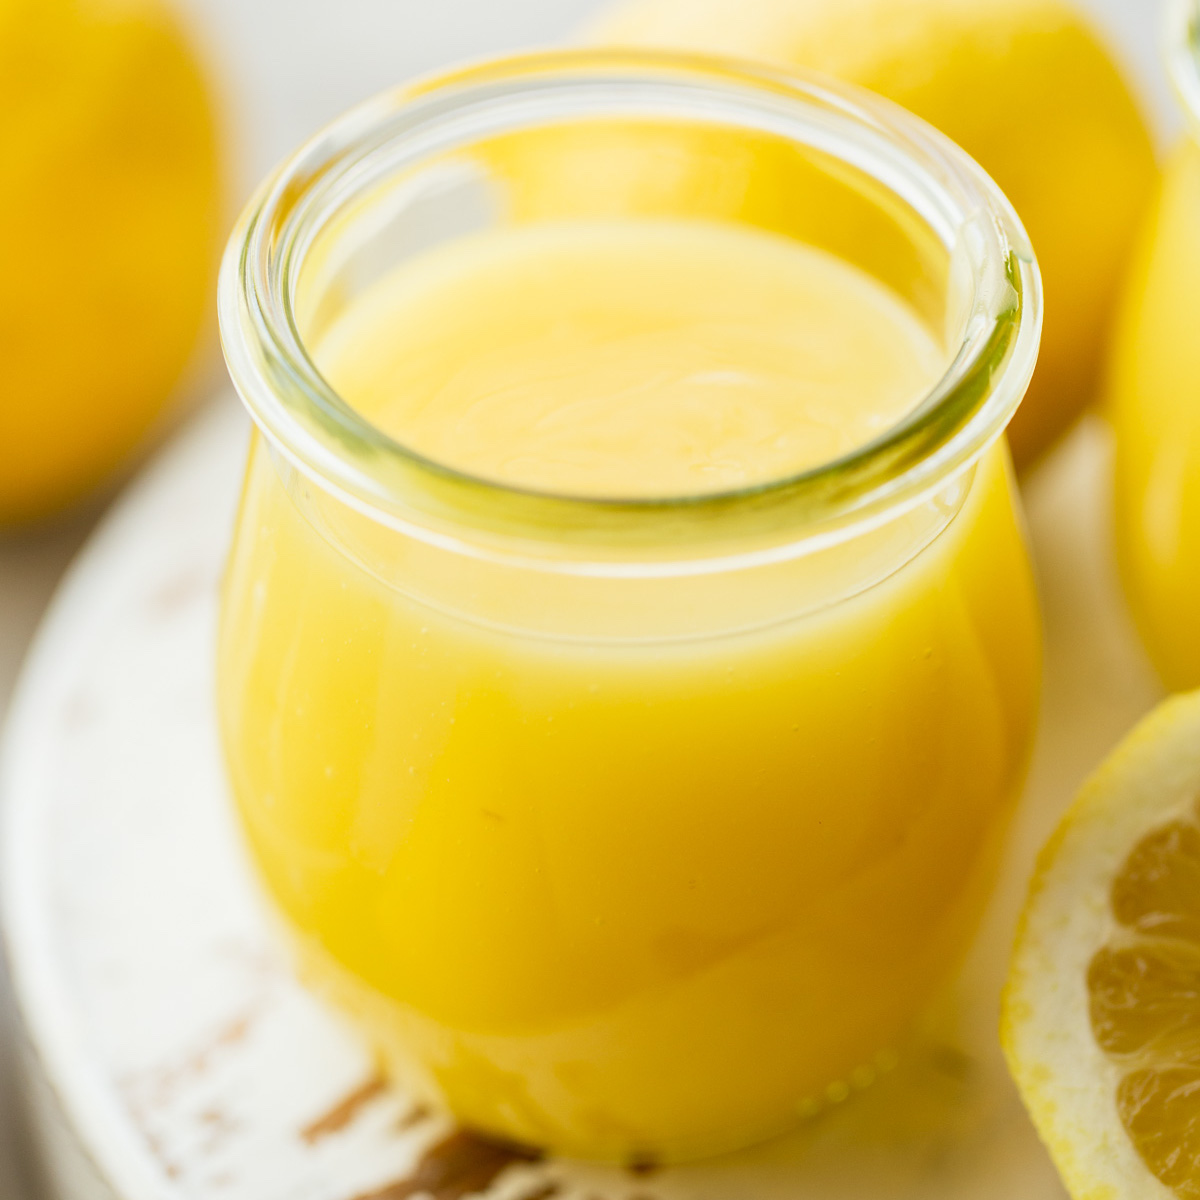 Microwave Lemon Curd Recipe (easy and quick) - Dessert for Two